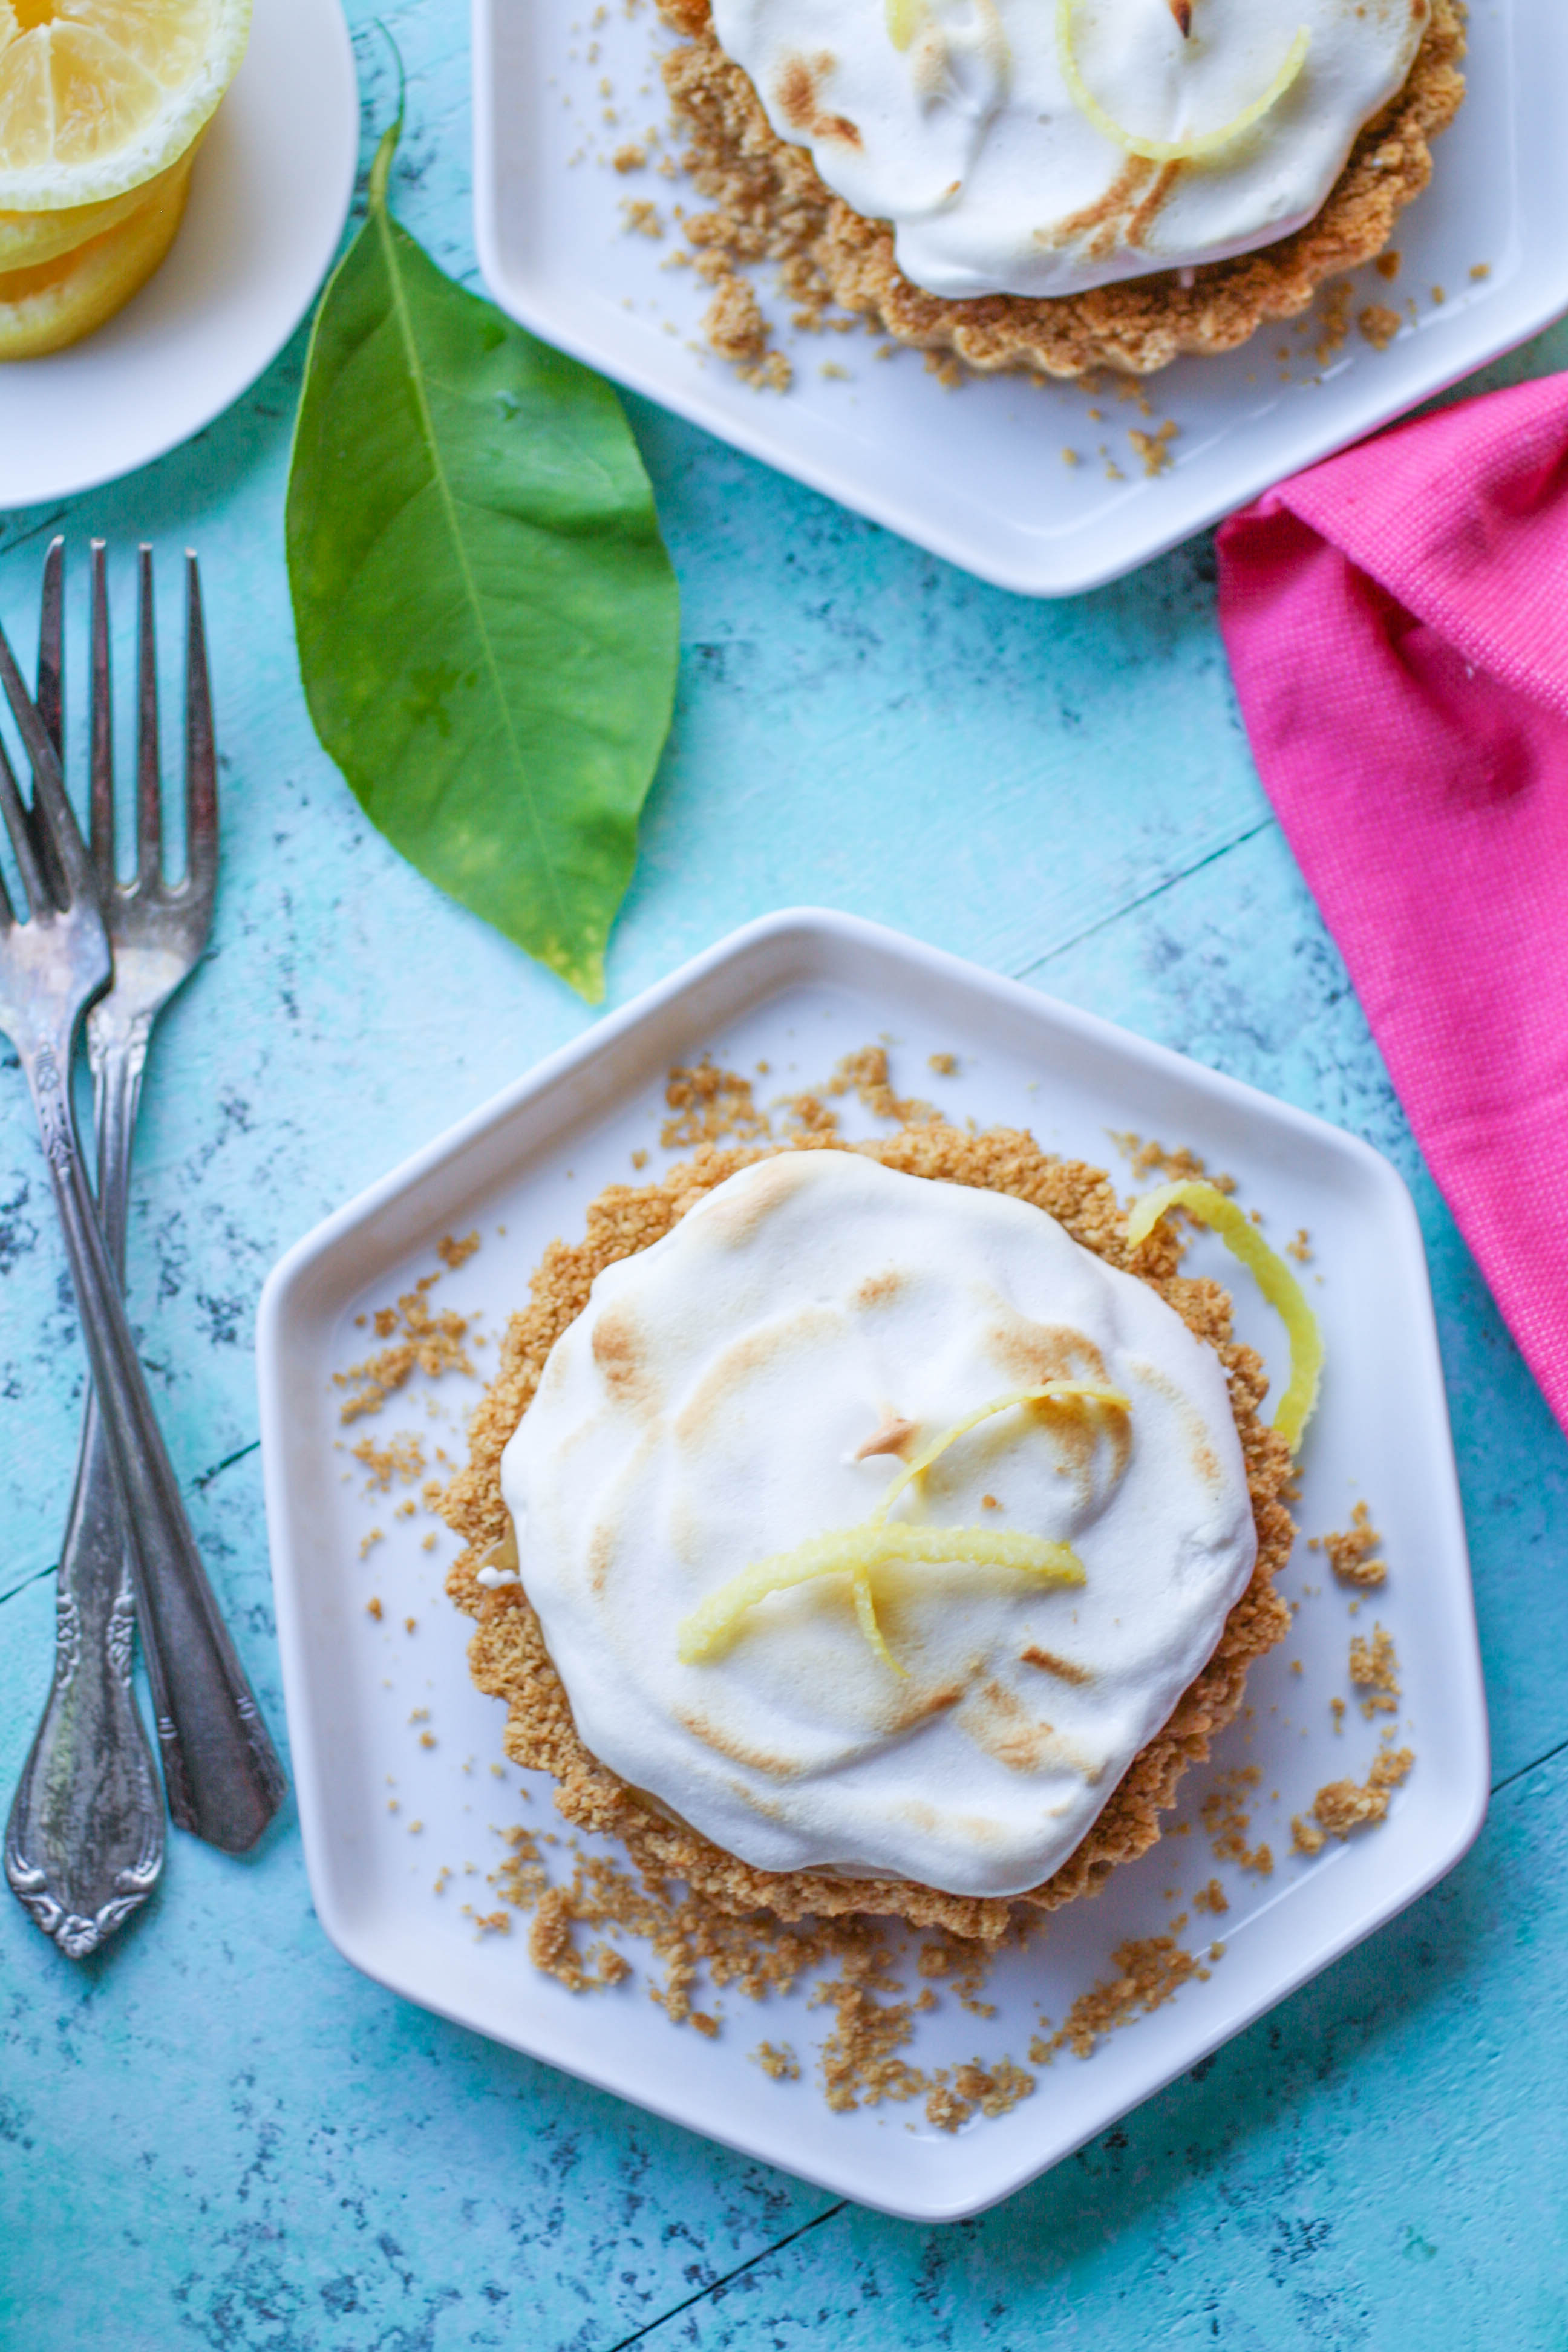 Lemon Meringue Tartlets are a bright and cheerful dessert! You'll love these Lemon Meringue Tartlets for a special treat.